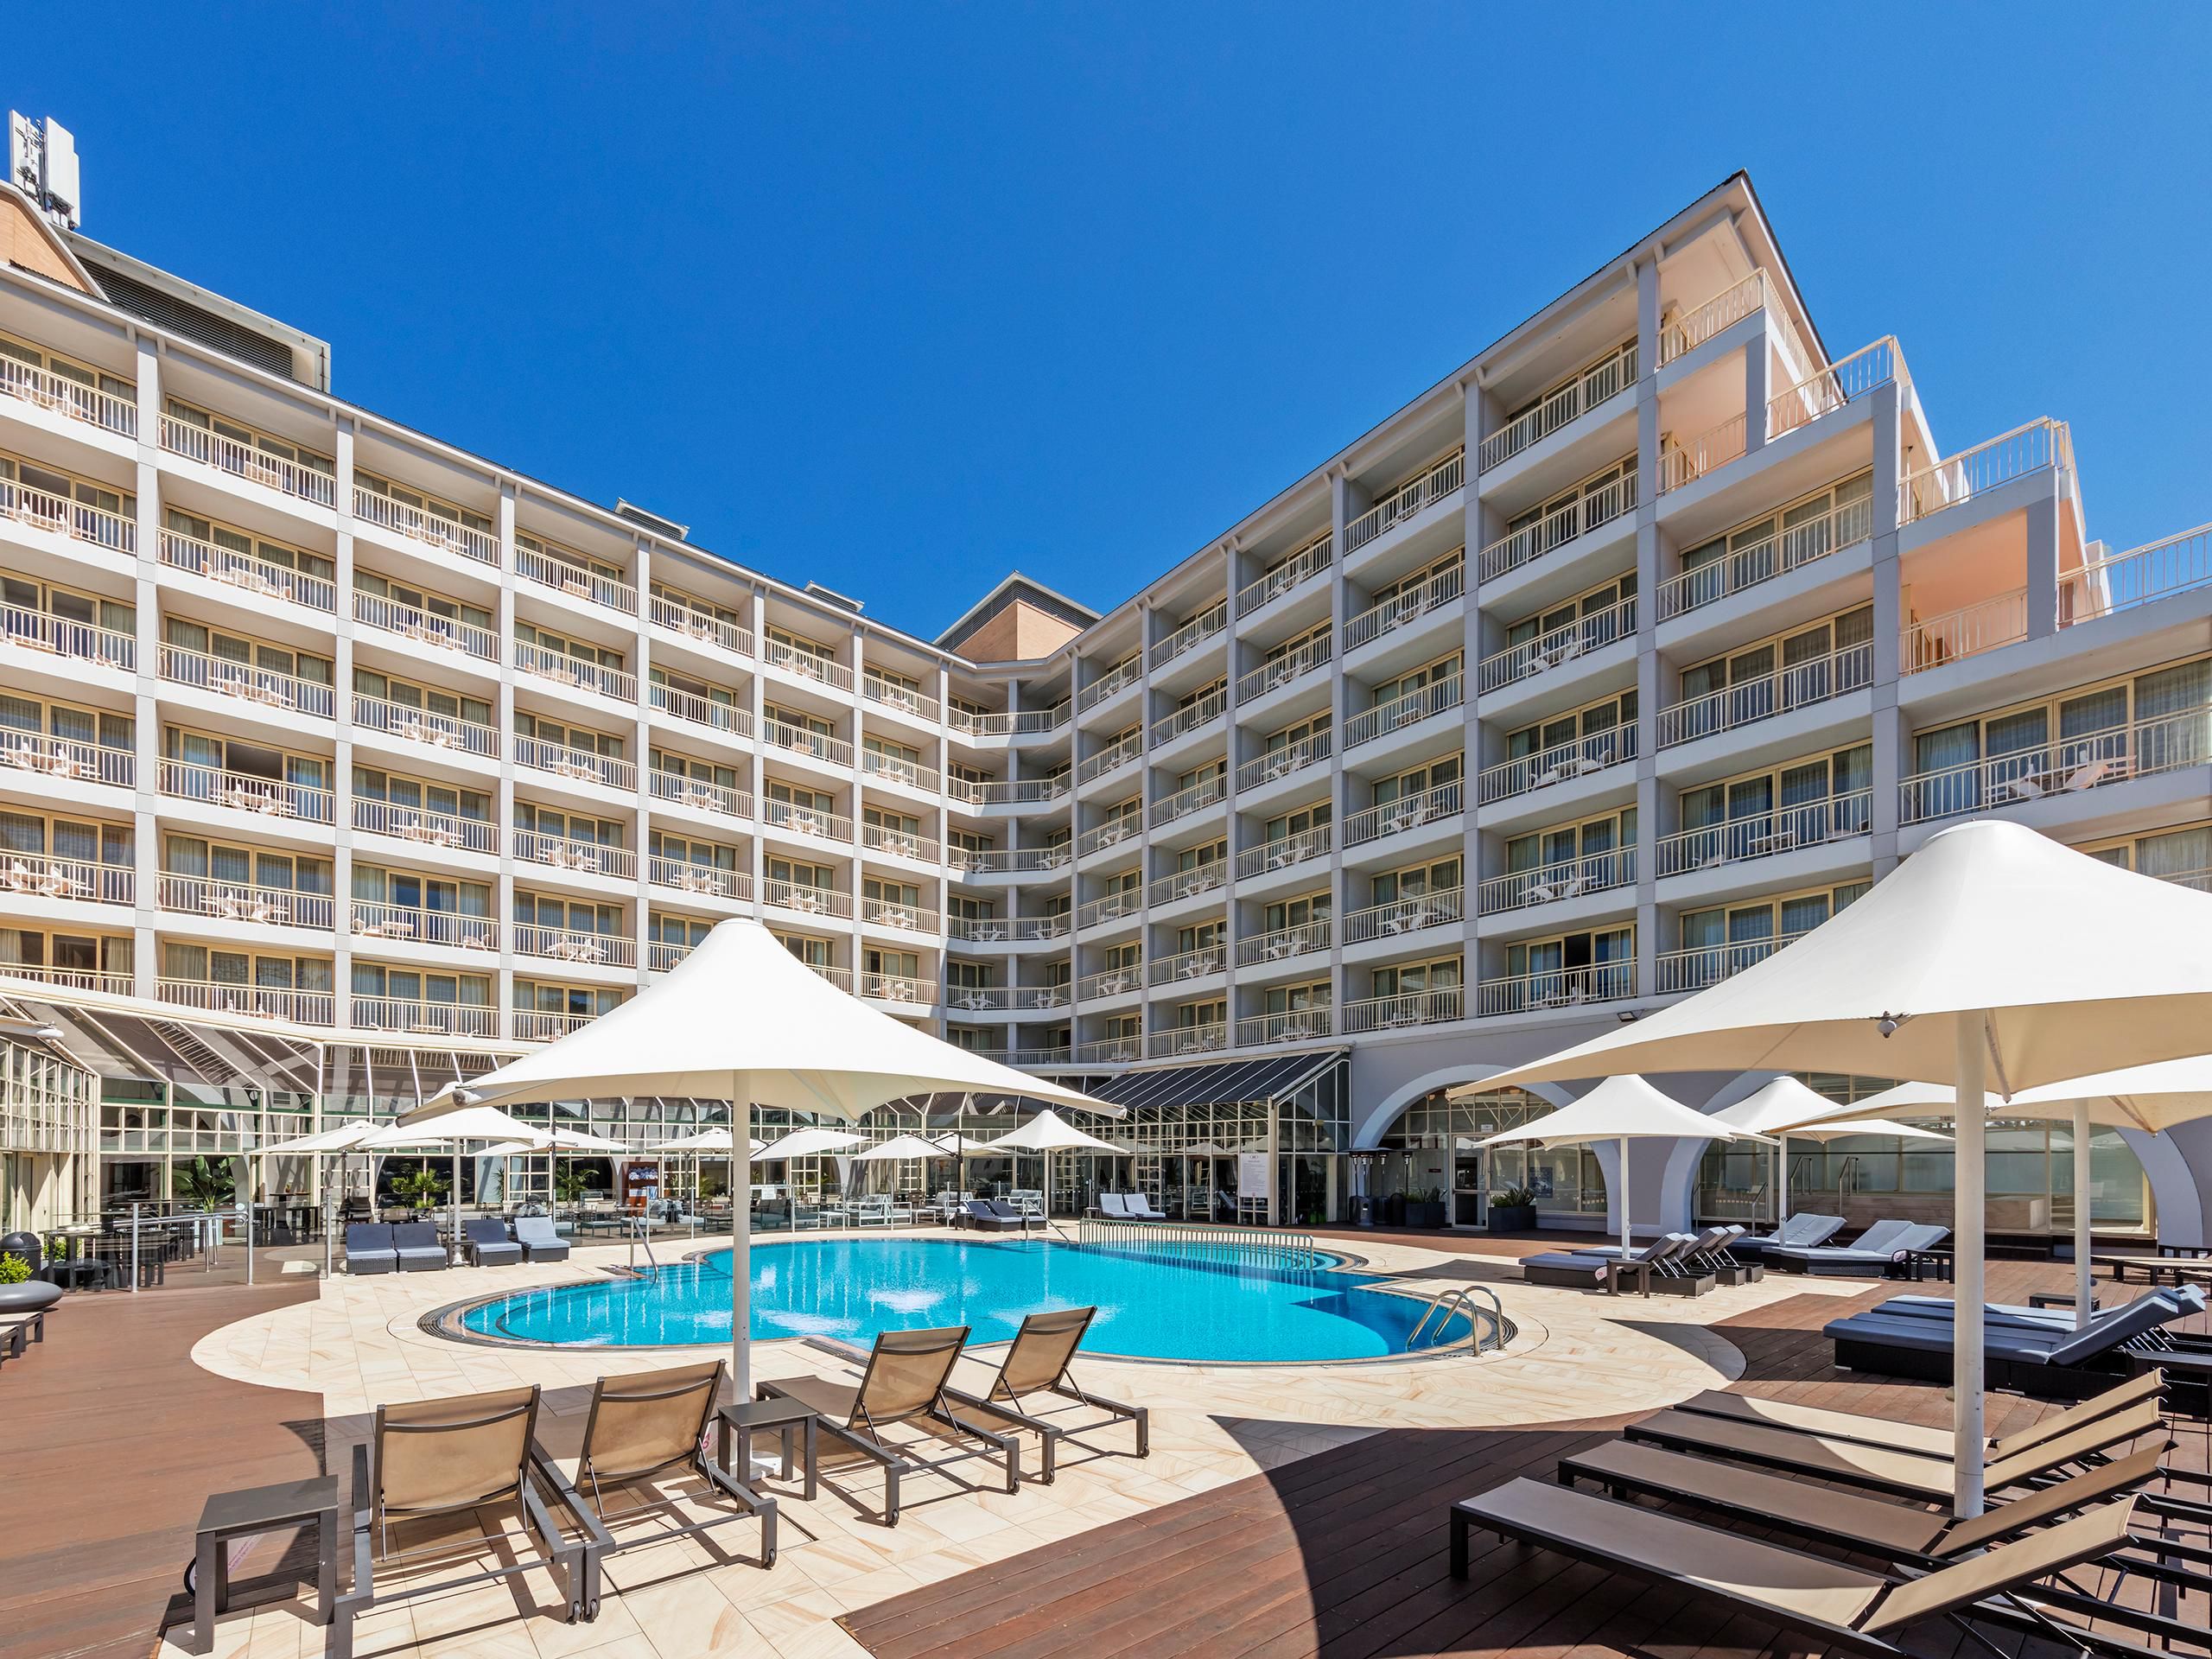 Sit back and relax by the pool at Crowne Plaza Terrigal Pacific. Take in breathtaking ocean views whilst indulging in delicious food and beverages from ‘The Deck Bar’. Offering everyone’s favourites of burgers, salads, beers and located poolside, you can sit back relax and enjoy the sunshine.